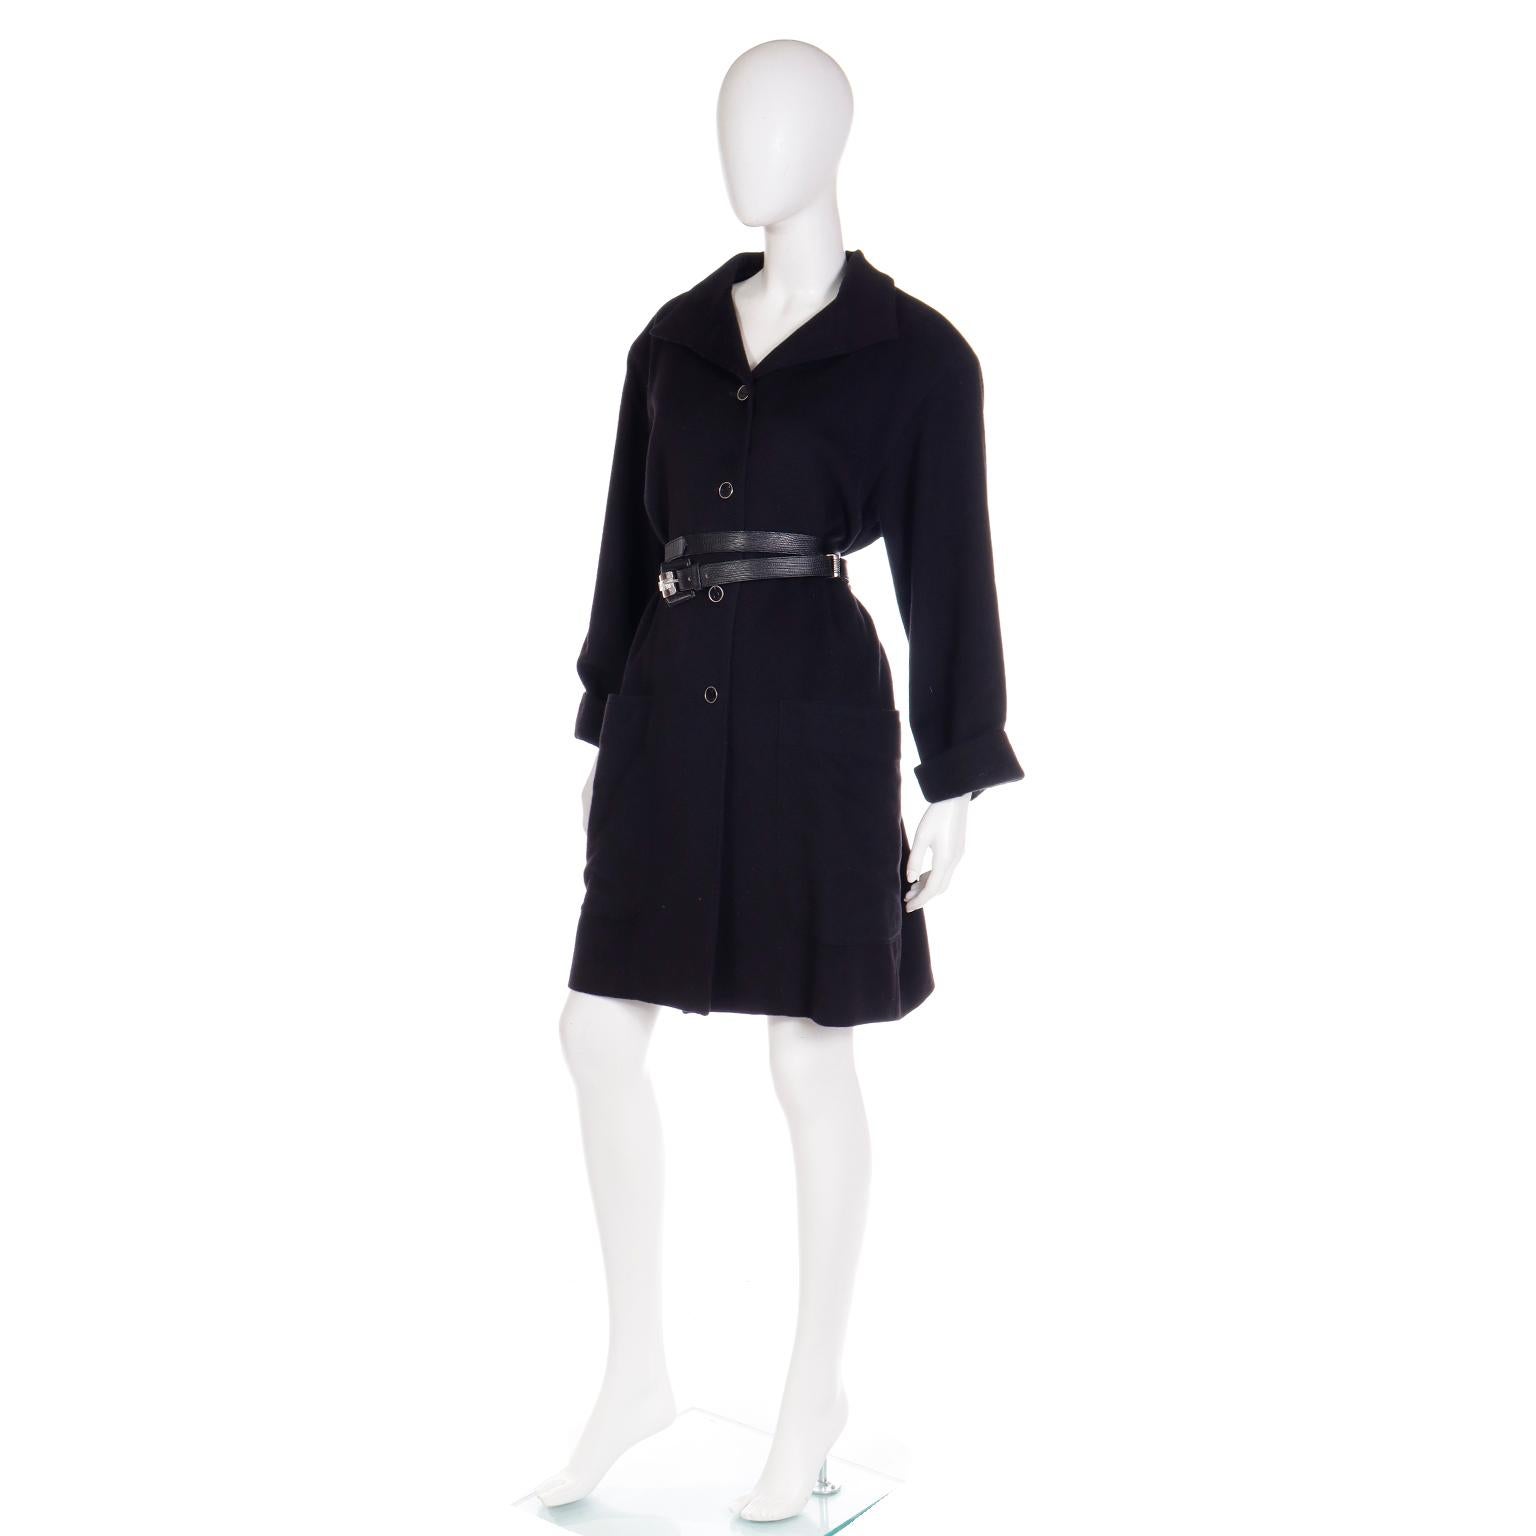 1987 Gianni Versace Vintage Black Wool Coat With Leather Belt 3